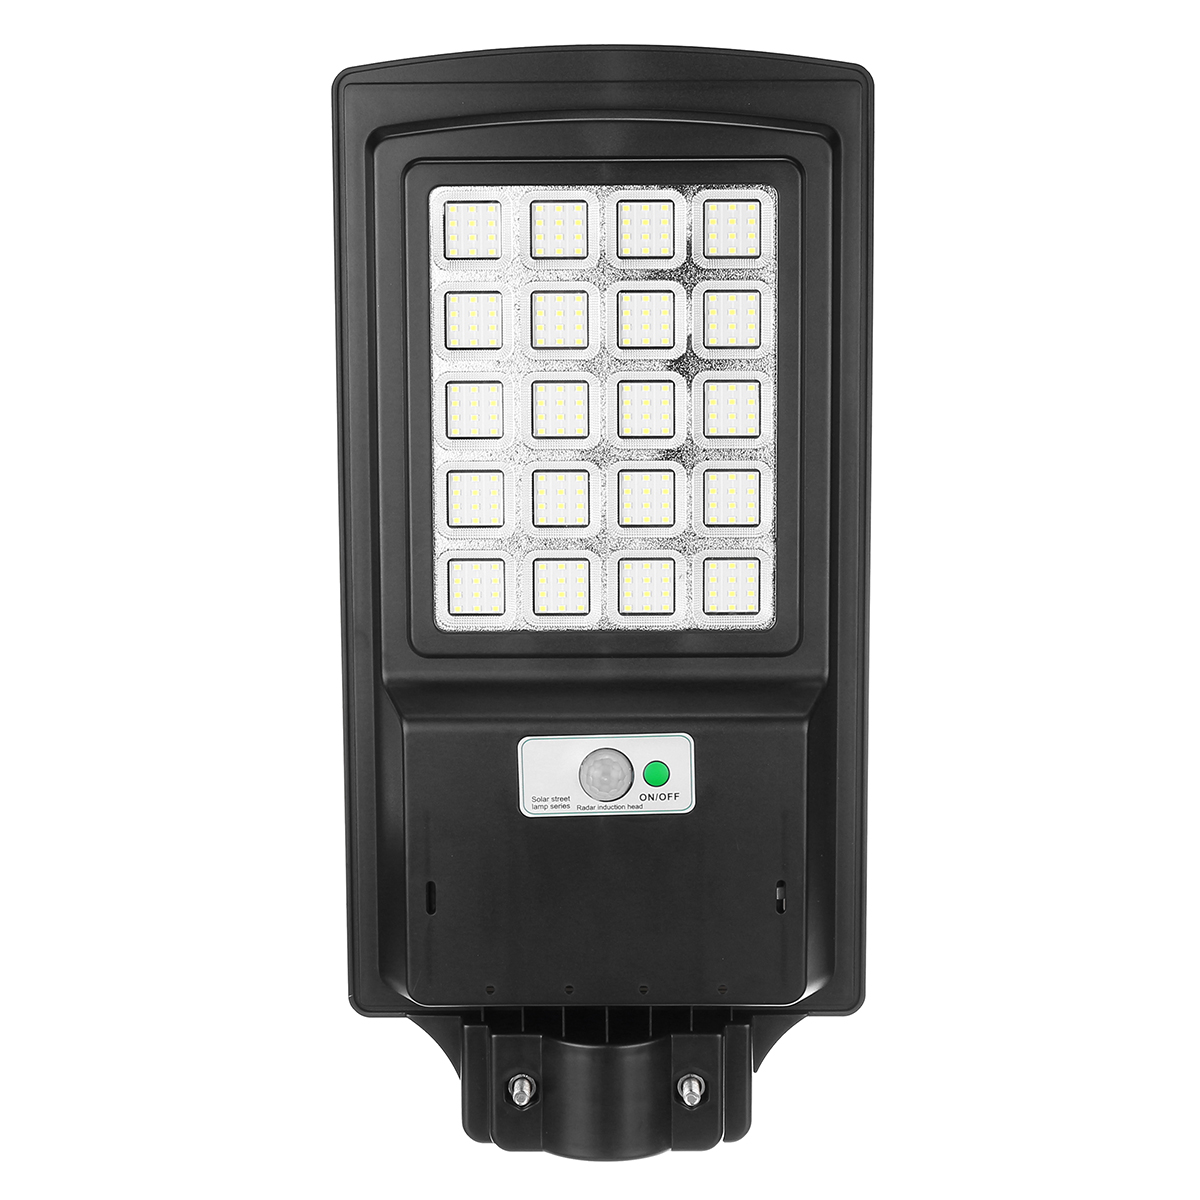 Find 240/560LED Solar Street Wall Light Solar Powered IP65 Waterproof Lamp PIR Motion Sensor Lamp Outdoor Garden for Sale on Gipsybee.com with cryptocurrencies